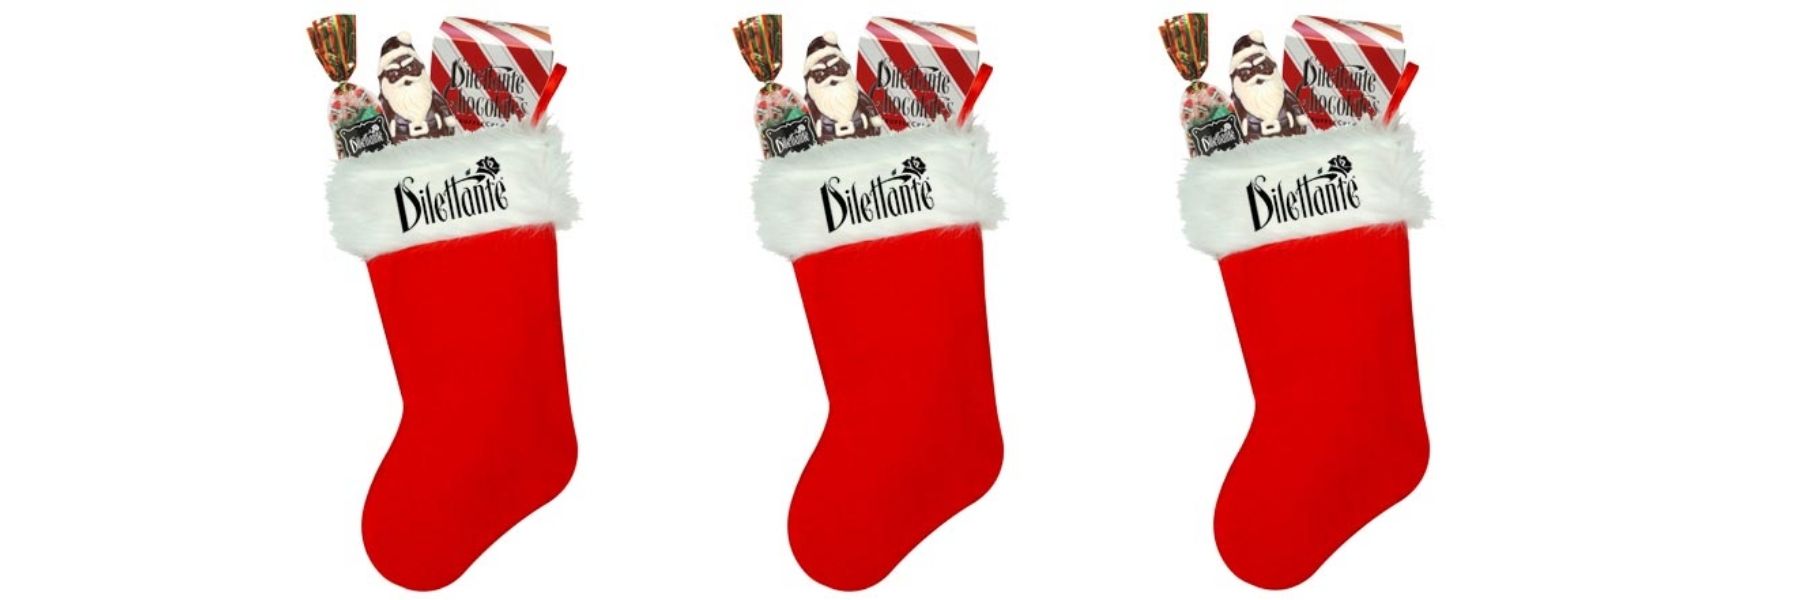 Dilettante Chocolates Stocking Stuffer Ideas with Three Red Stockings Against a White Background